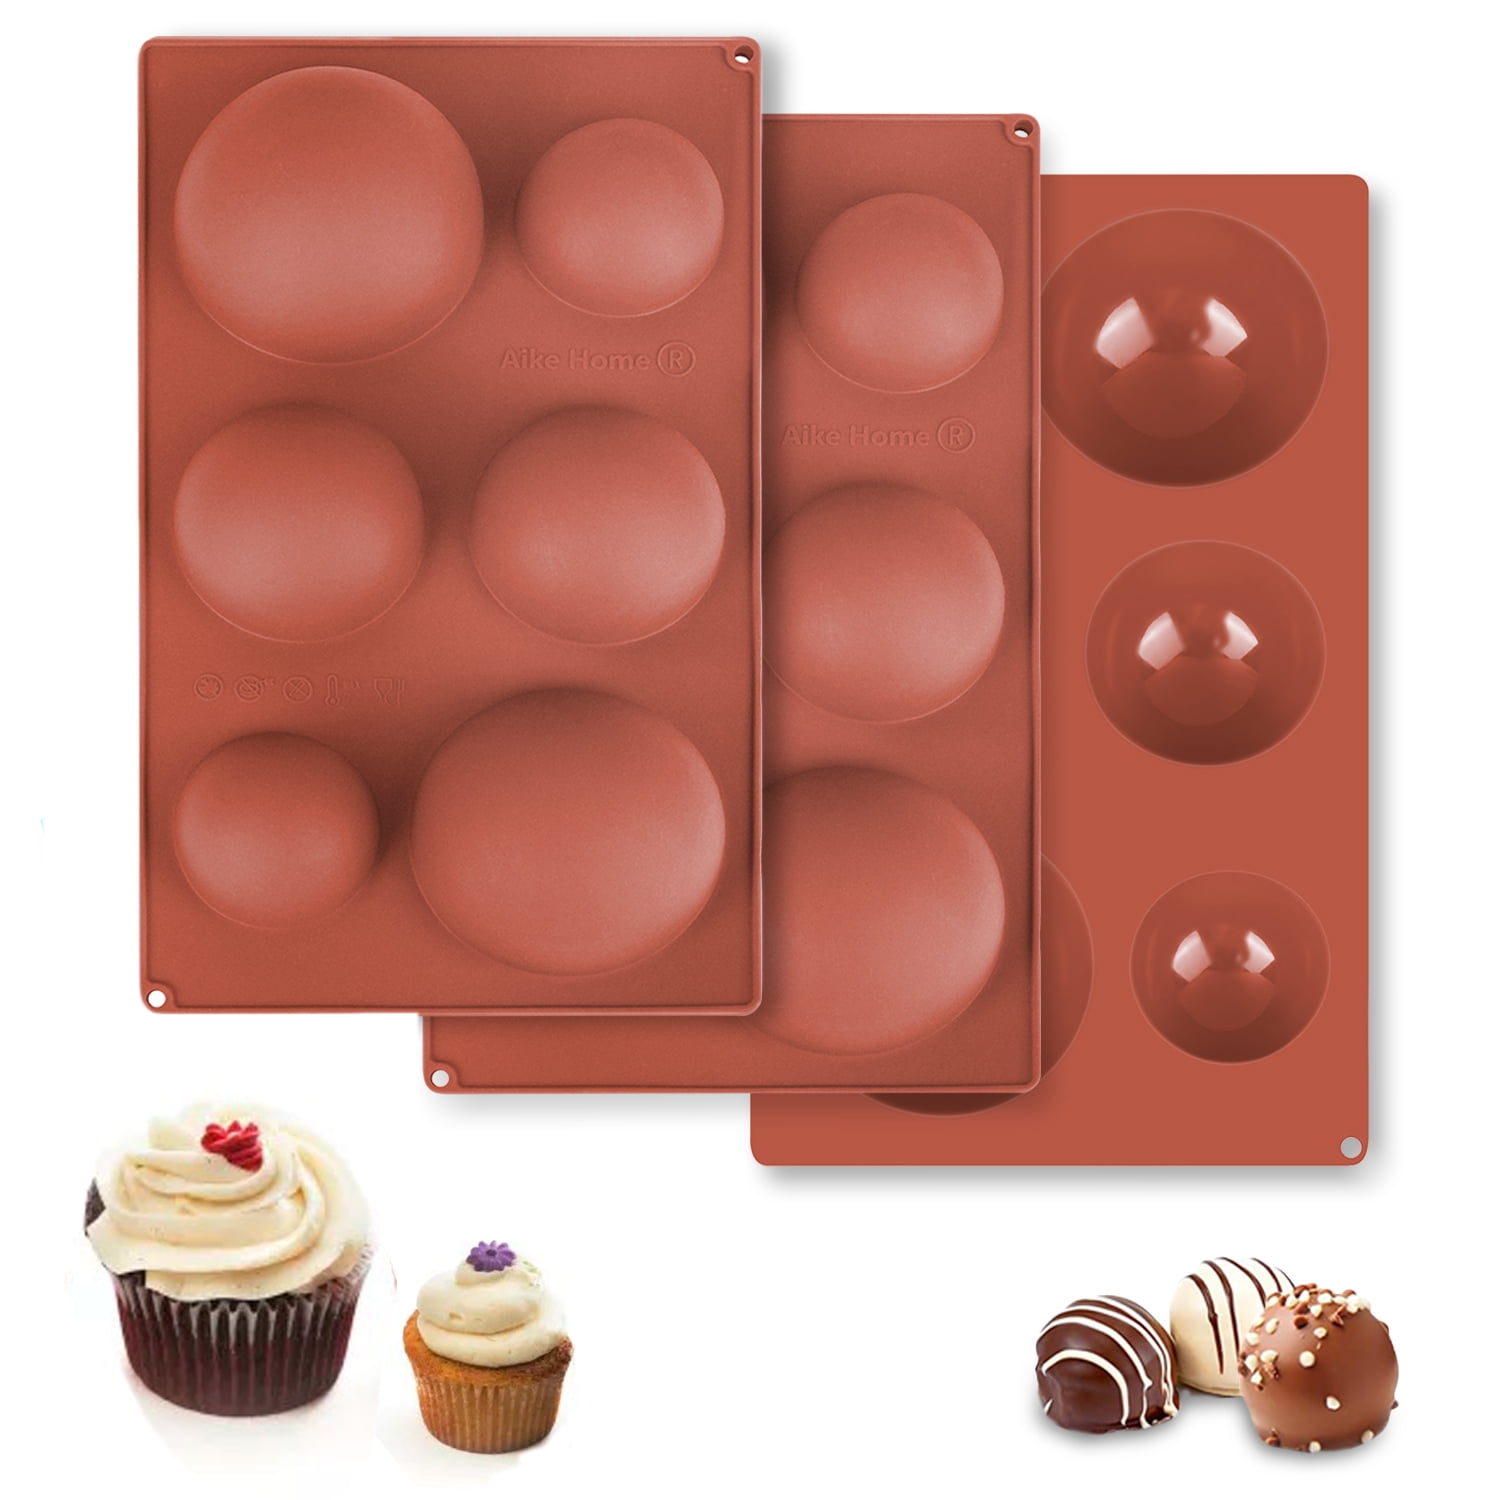 Lifesize Horse Shoe Chocolate Silicone Mould Cake Decorating Wedding Favours for sale online